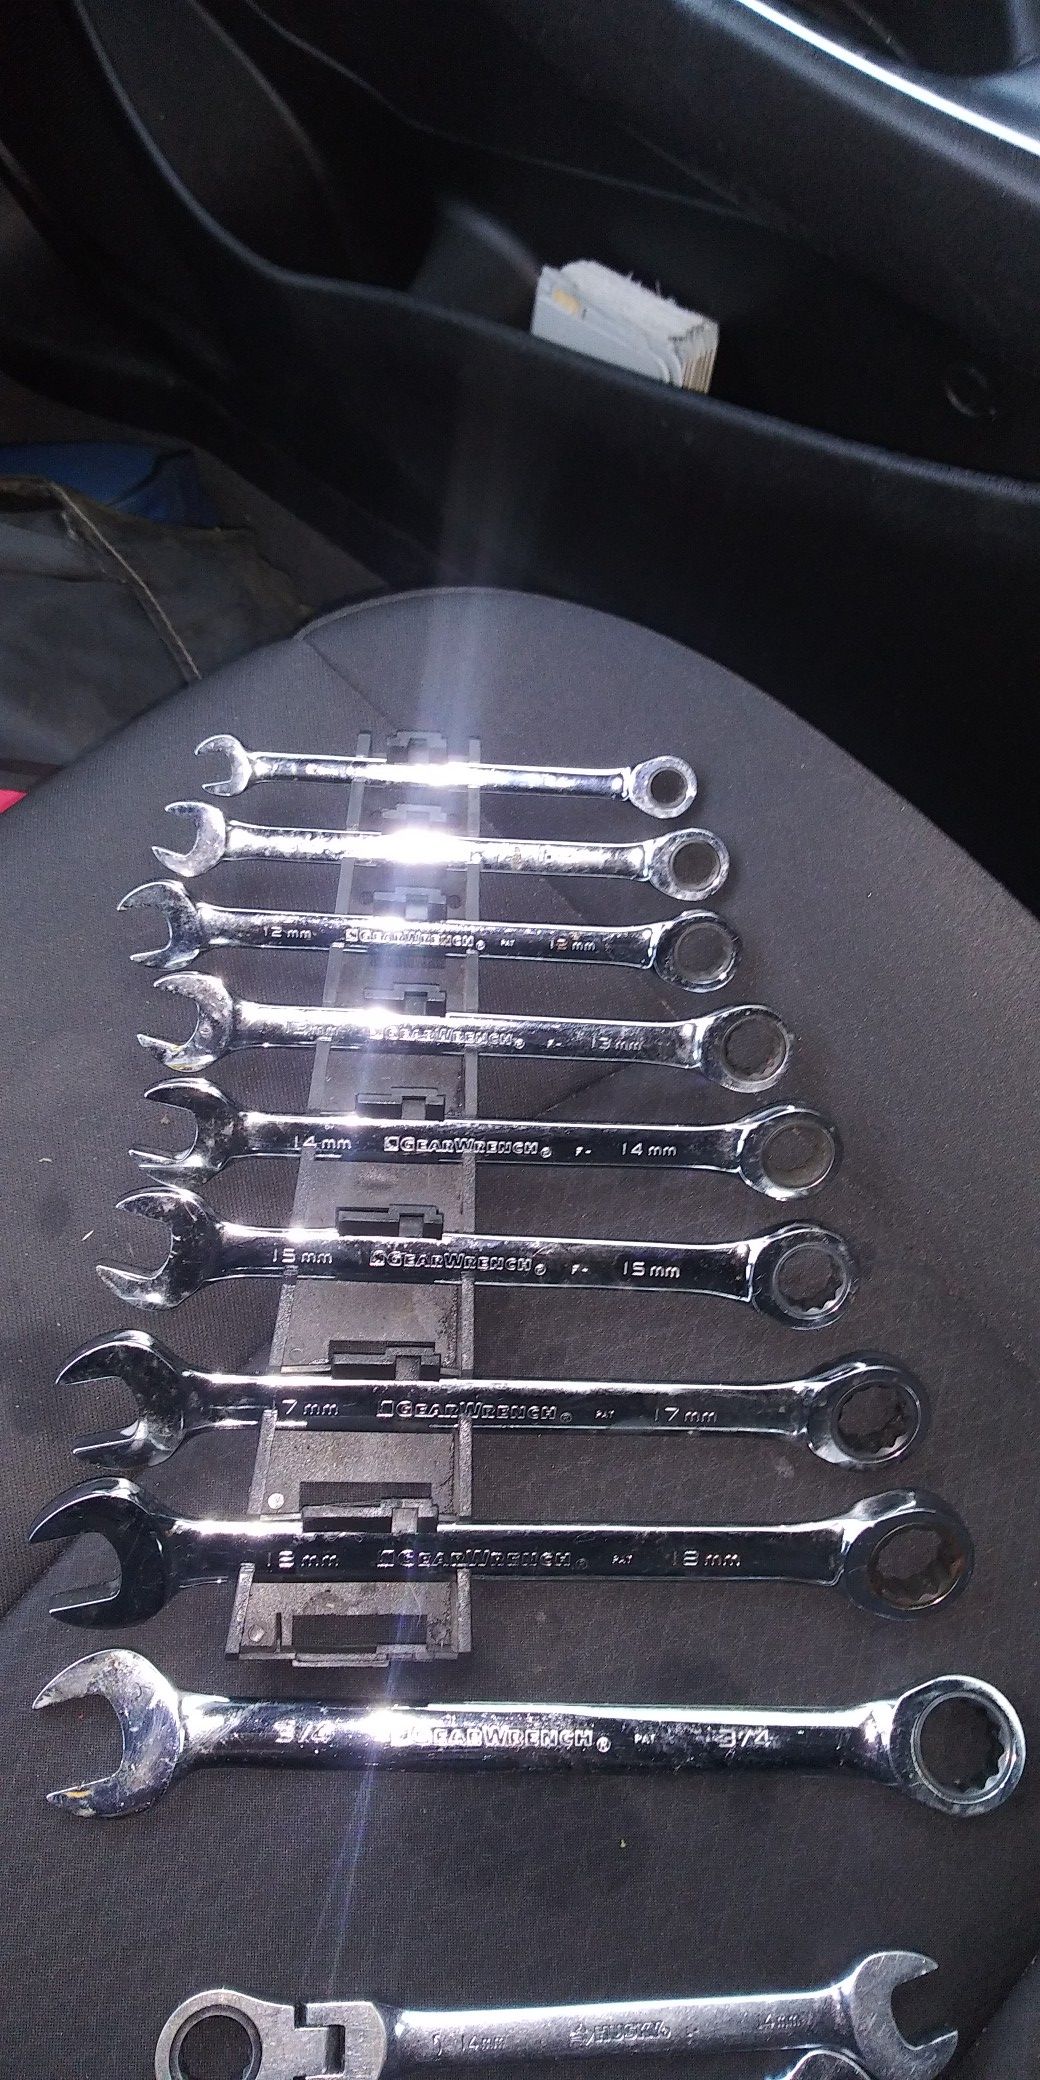 Brand new ratchet wrenches, tool kits, hand tools etc !